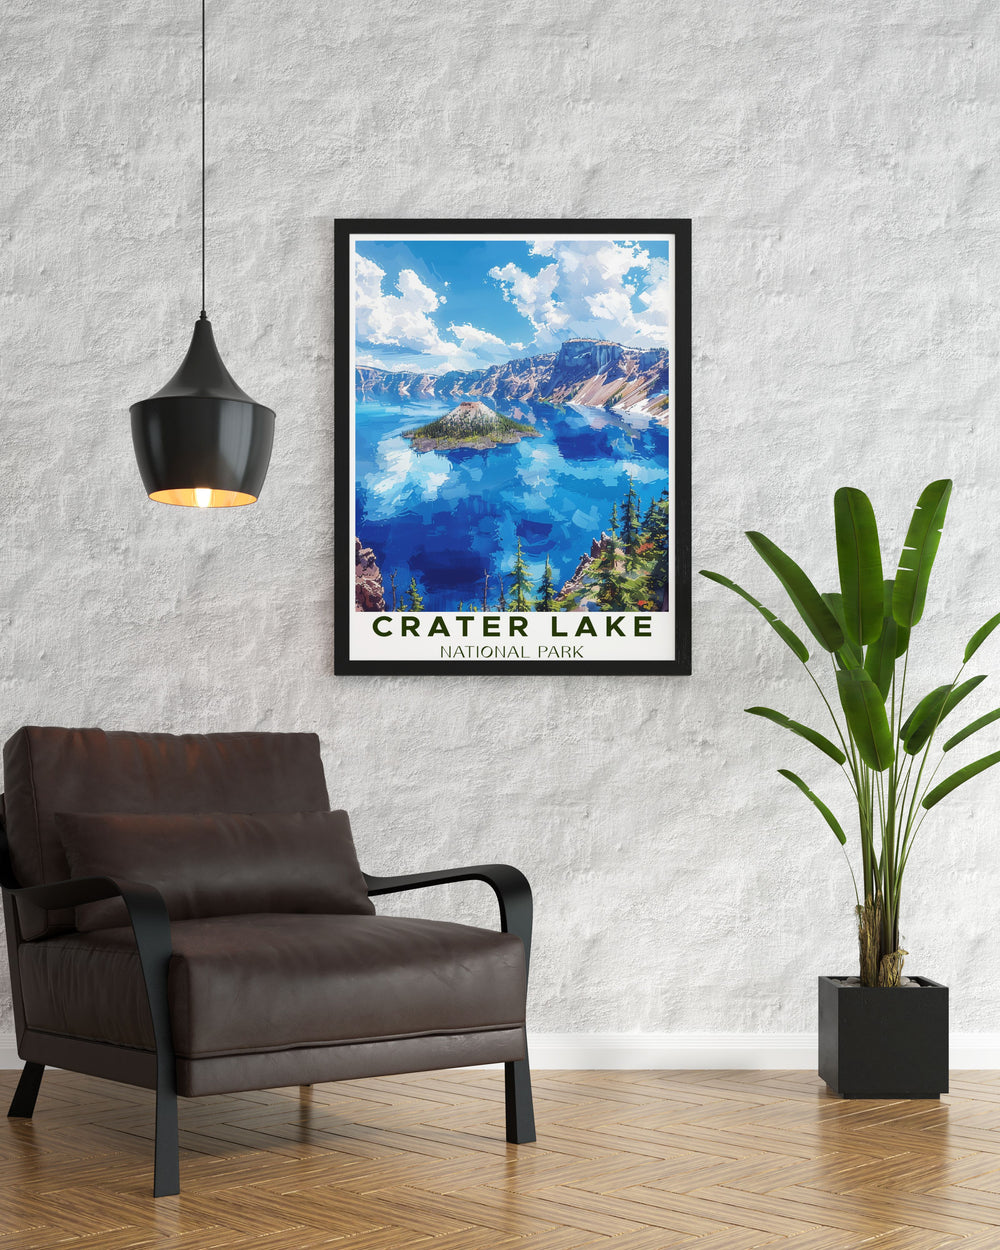 Exquisite Crater Lake travel poster featuring the iconic caldera ideal for nature enthusiasts. This National Park poster is a perfect addition to home decor offering a vibrant and detailed representation of Crater Lakes breathtaking landscapes.